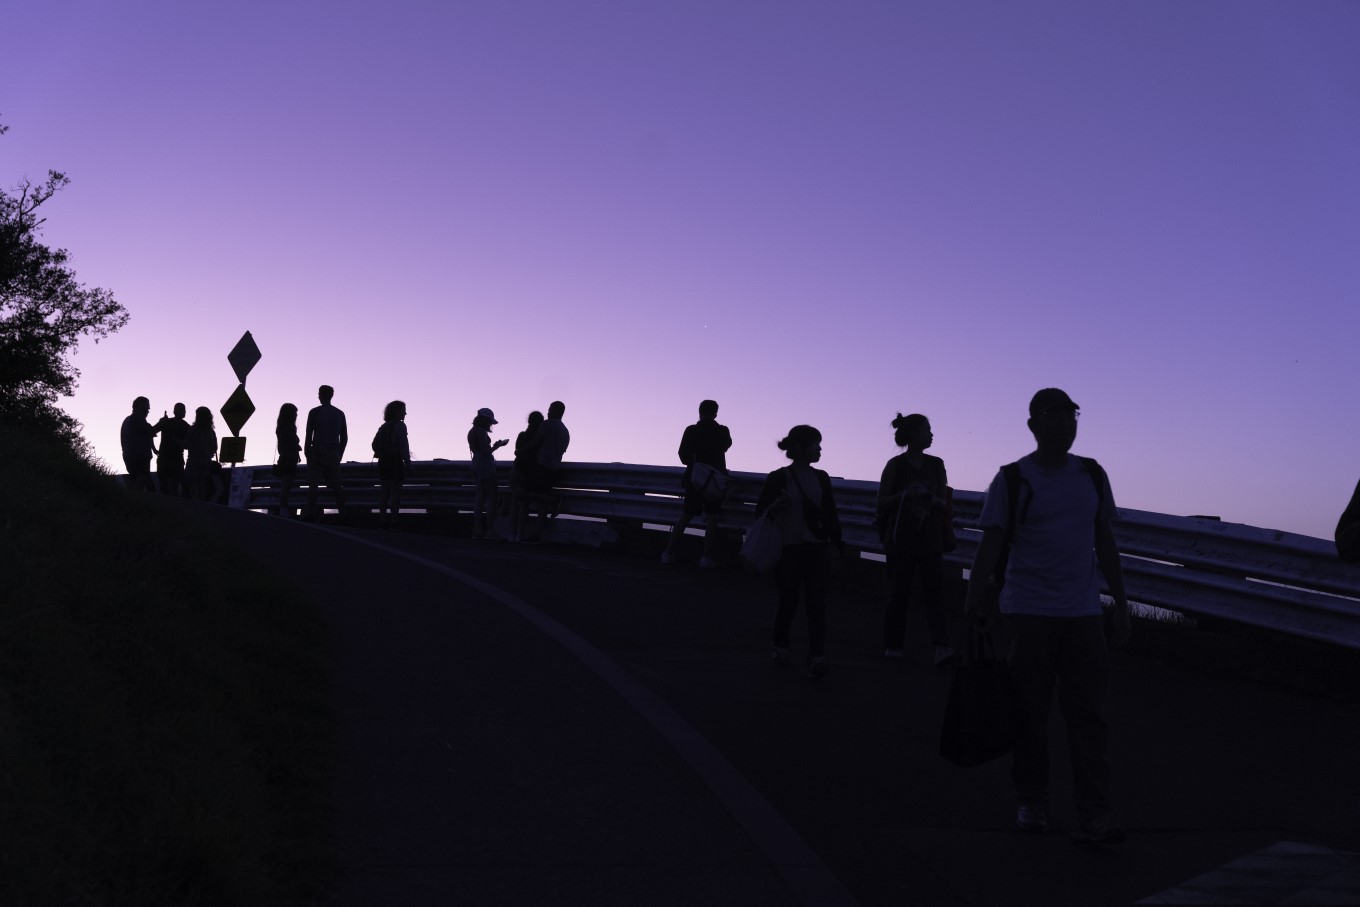 Be rewarded with a magnificent sunset after climbing Maungawhau, the highest natural point in Auckland, on a fine day.